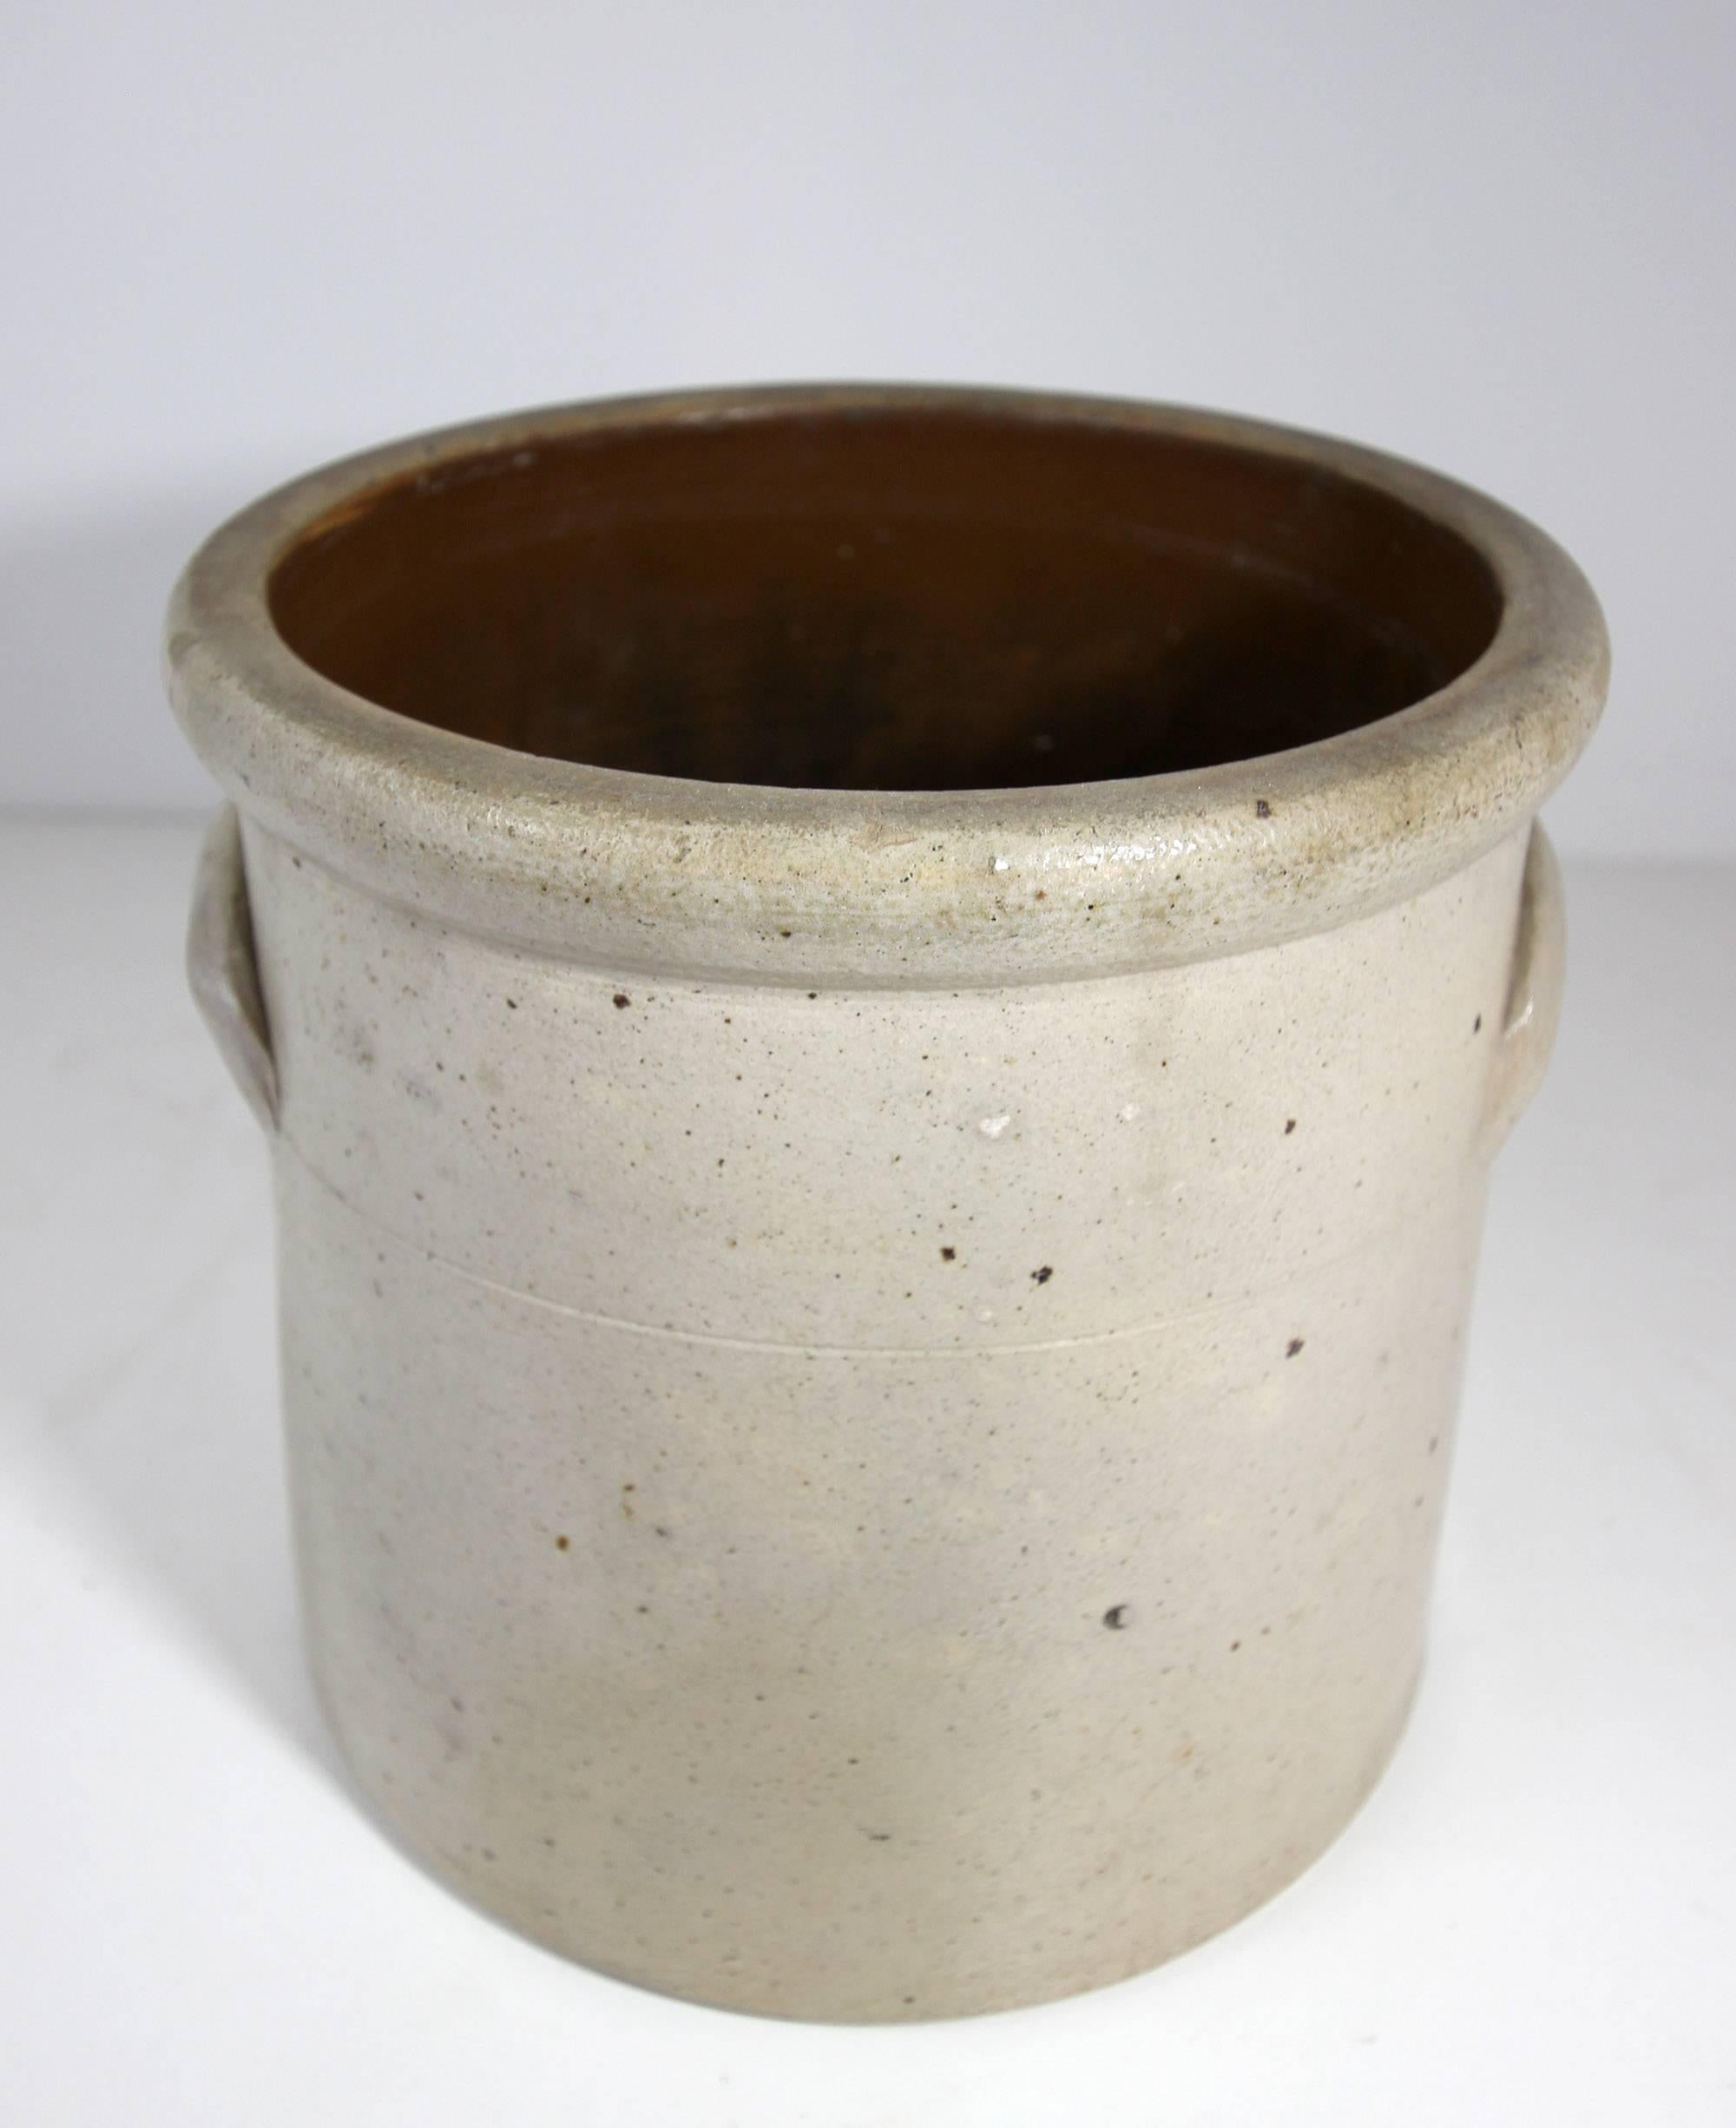 Country Stoneware Crock with Bird Mid-19th Century, Two Gallon